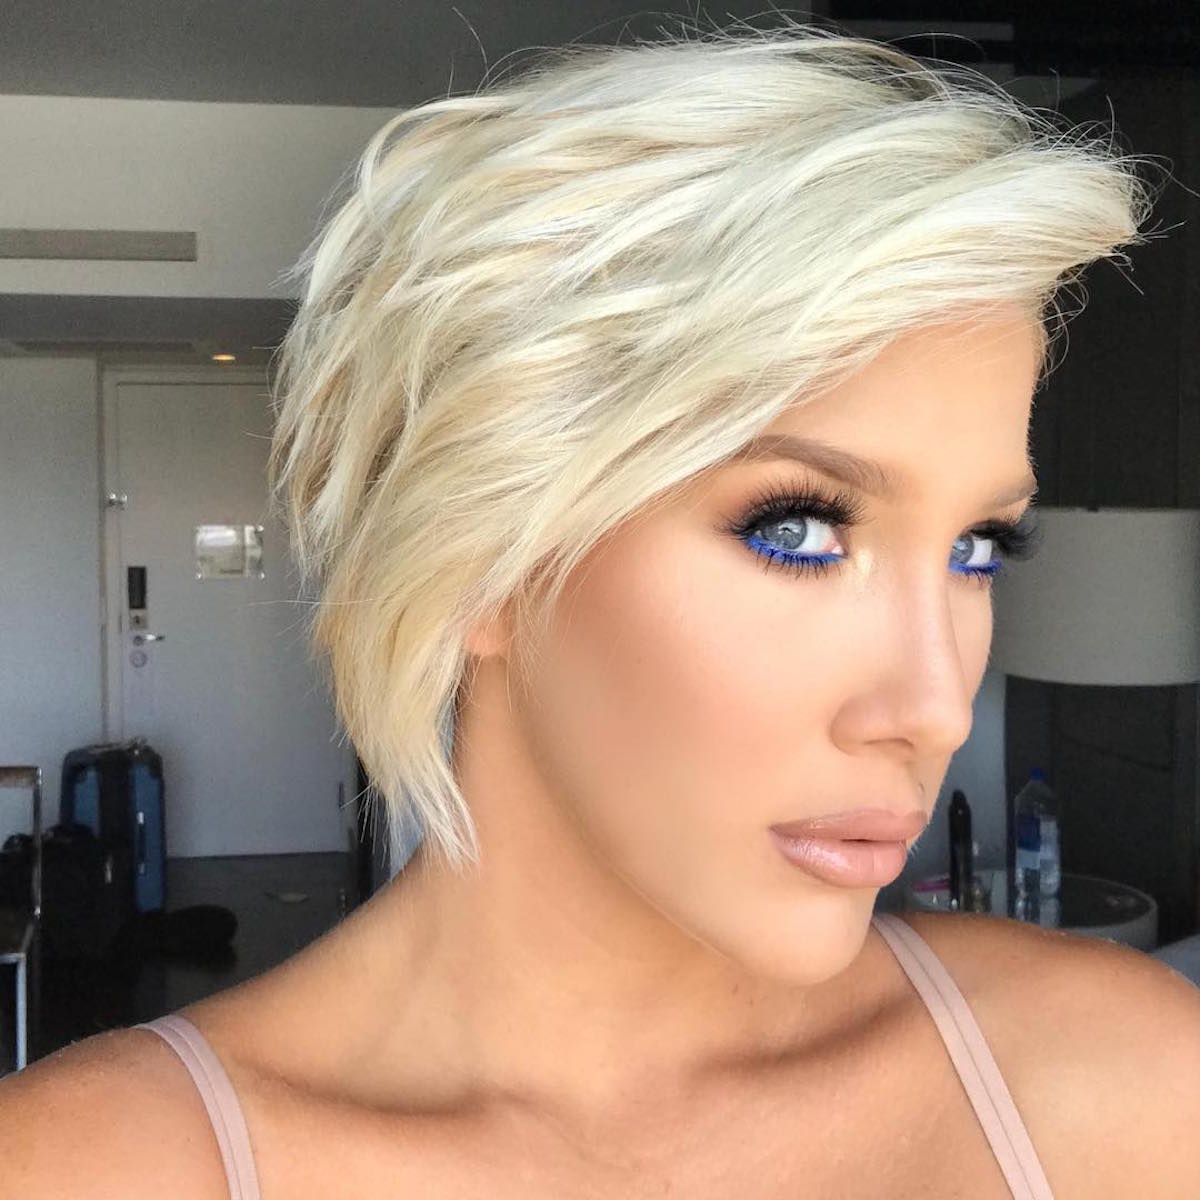 Nude pictures of savannah chrisley